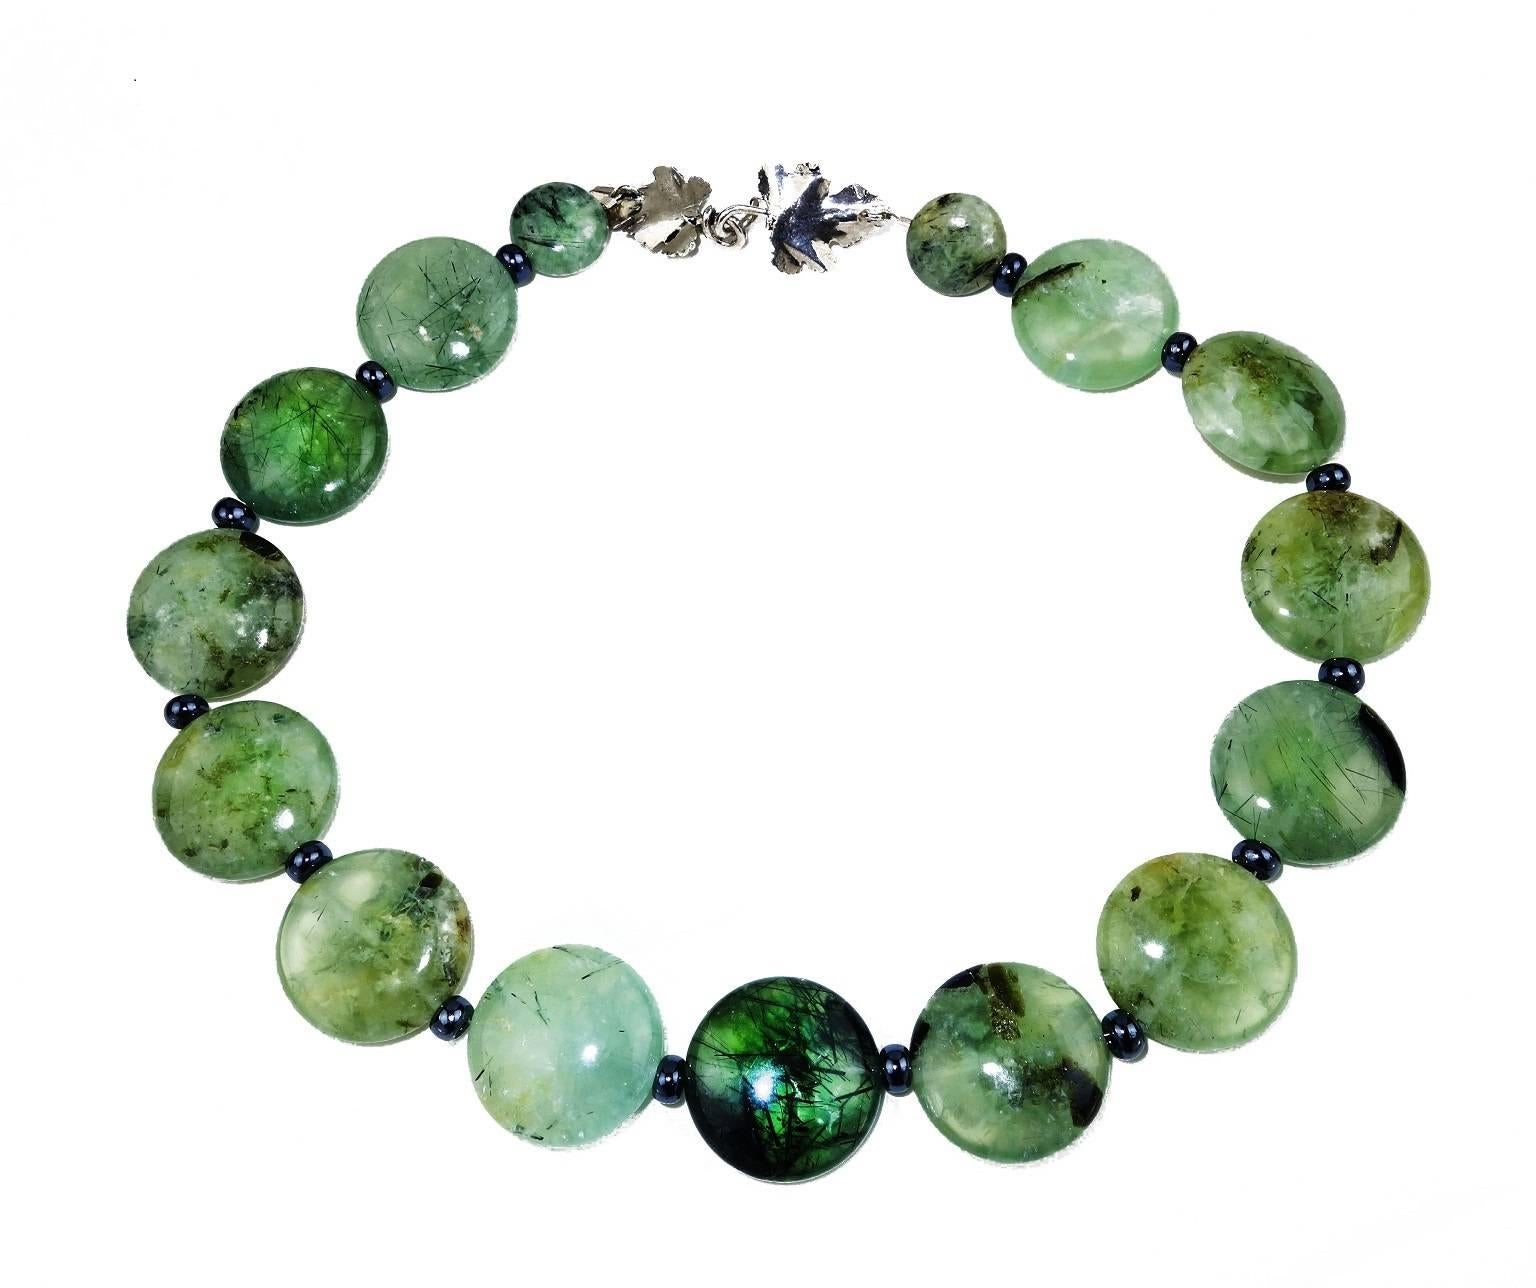 Gorgeous Necklace of Distinctive Green Brazilian Prehnite  25mm Discs accented with shiny gray spacers.  The clasp is a beautiful Turkish Sterling Silver, double  sided leaf motif that you can slide around  to be a focal.  18 Inches in length.  More